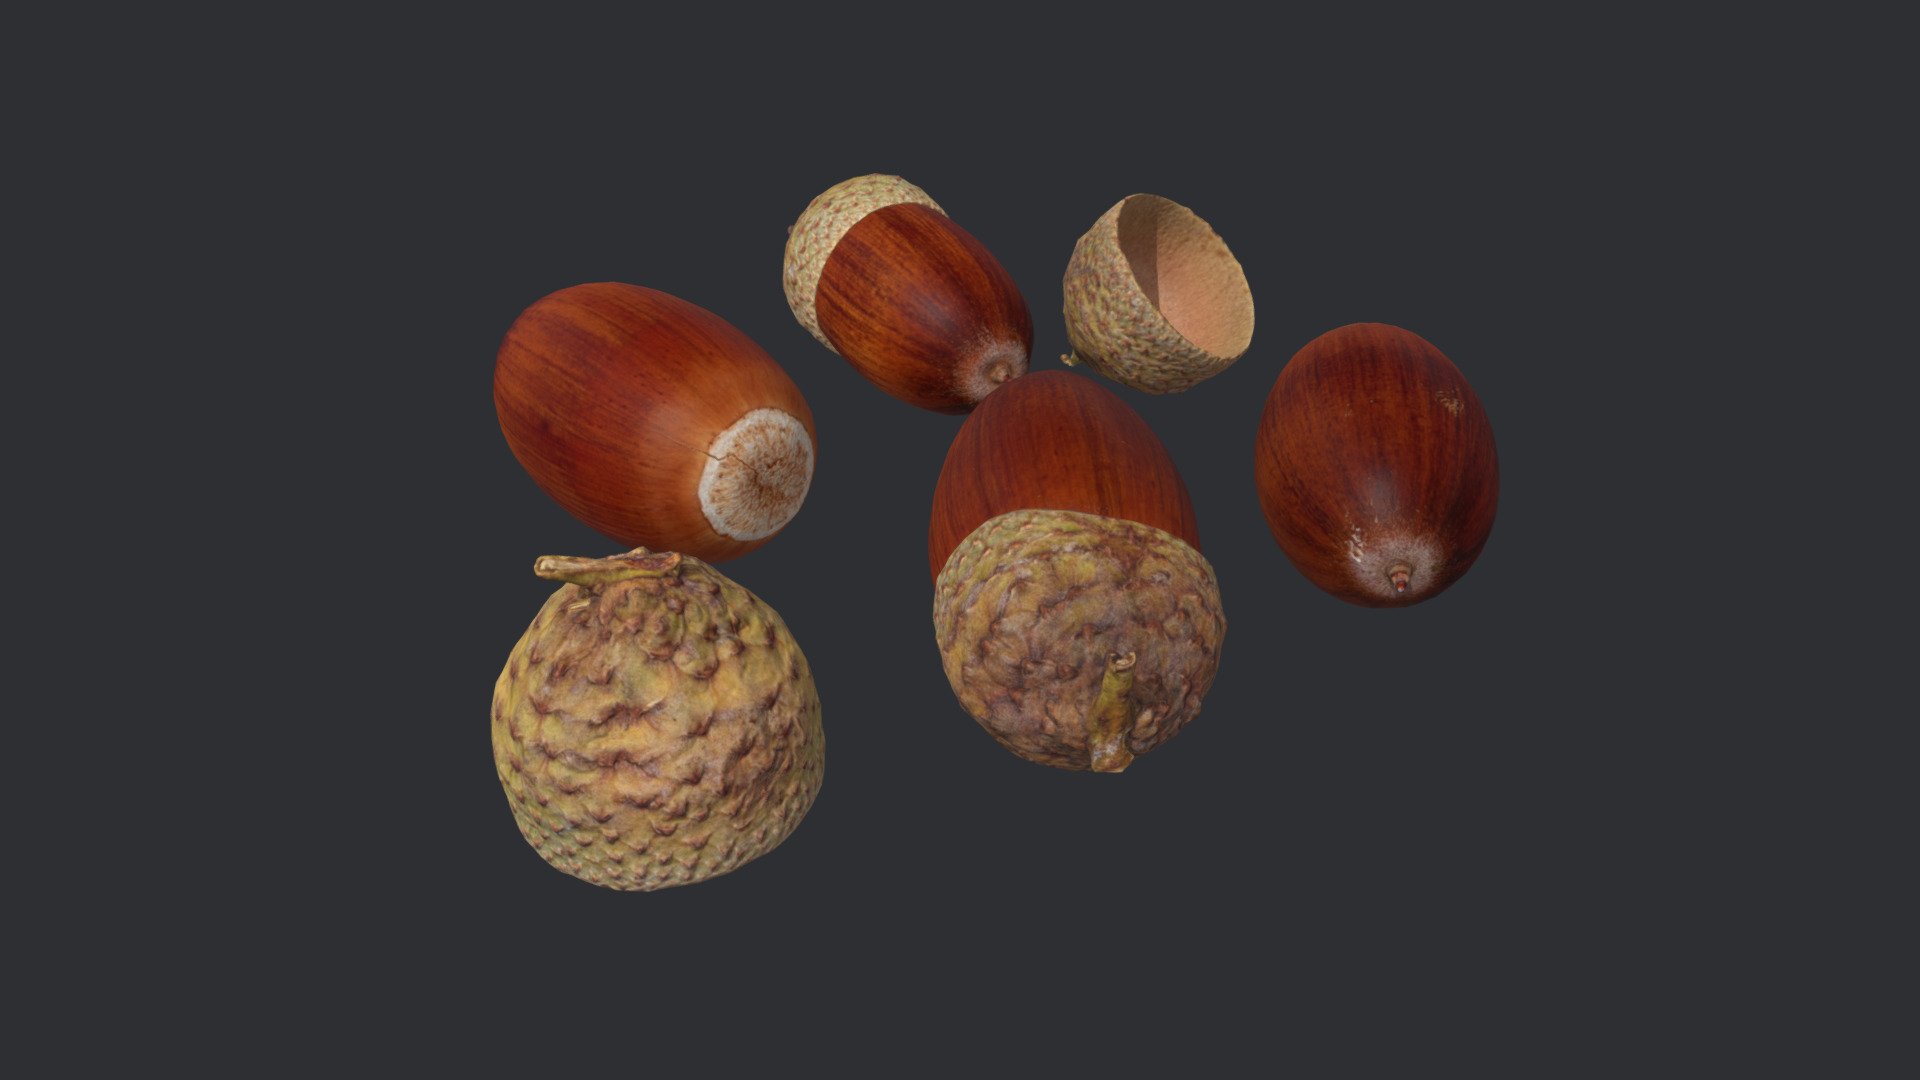 Four individual photogrammetry models of acorns with separate cupules.

All models retopologized/optimized into quads with clean UVs.

Each model has it’s own 4K PNG Diffuse, Normal and Roughness textures (cuples have Diffuse and Normal textures only).

Real world scale 3d model